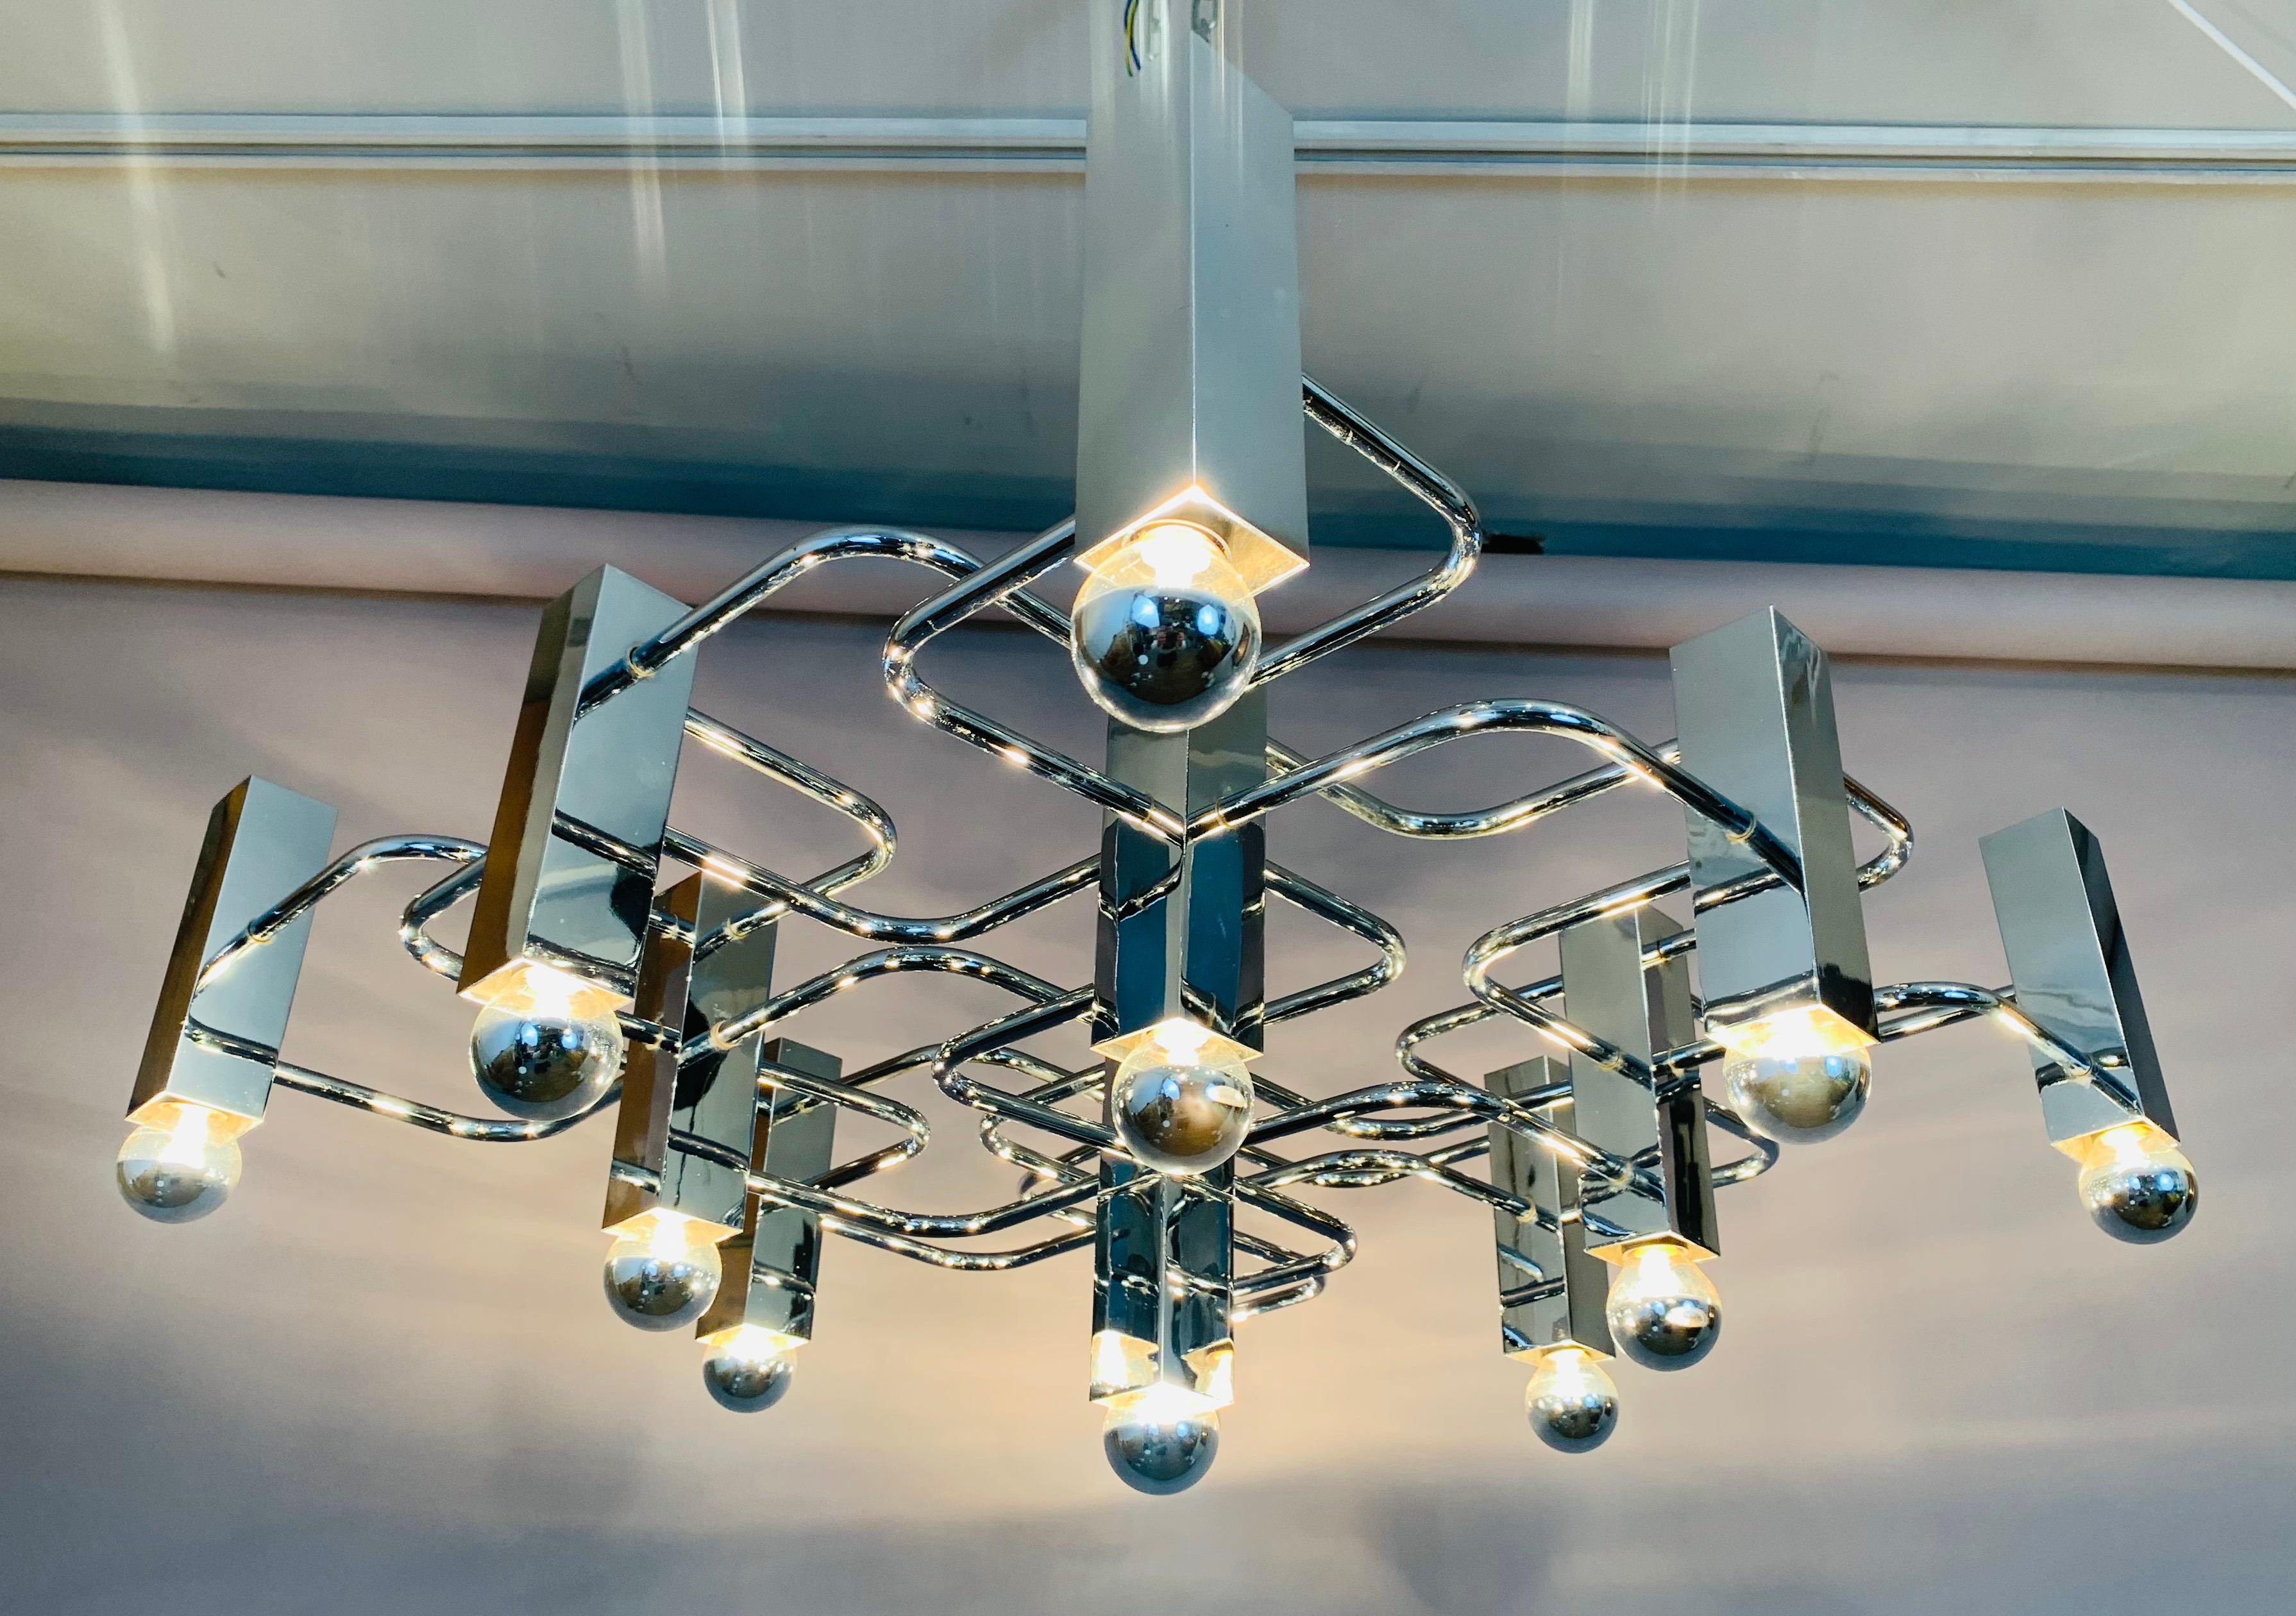 A stunning and striking chromed metal geometric chandelier designed by Gaetano Sciolari for S.A. Boulanger in Italy during the 1960s. The 13 vertical chromed square bulb holders are connected by interconnecting horizontal thin chromed tubes which